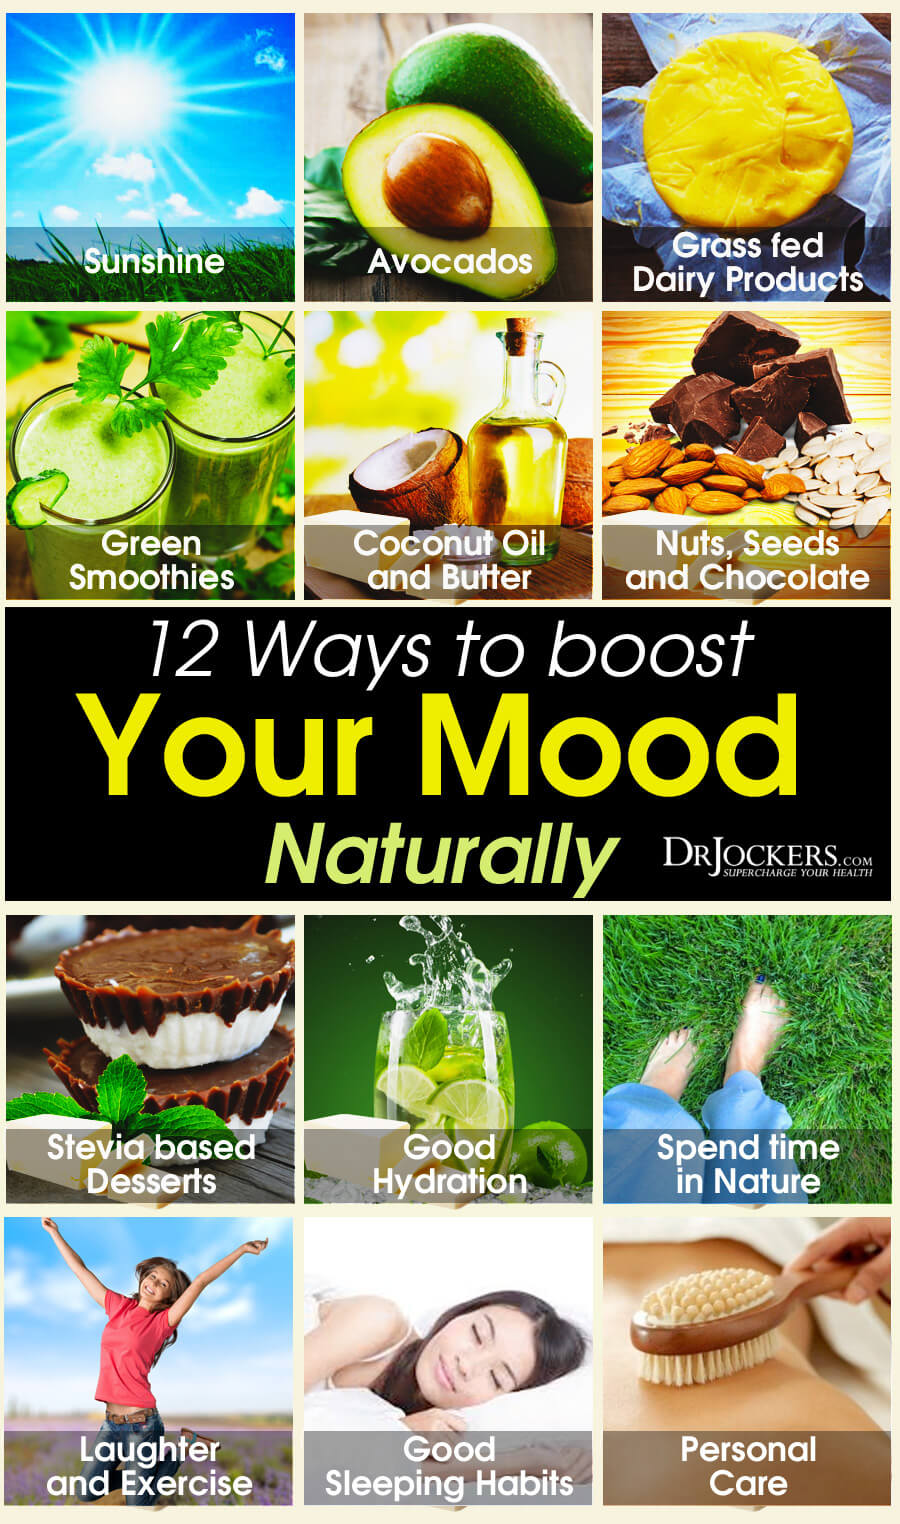 mood, 12 Ways to Boost Your Mood Naturally